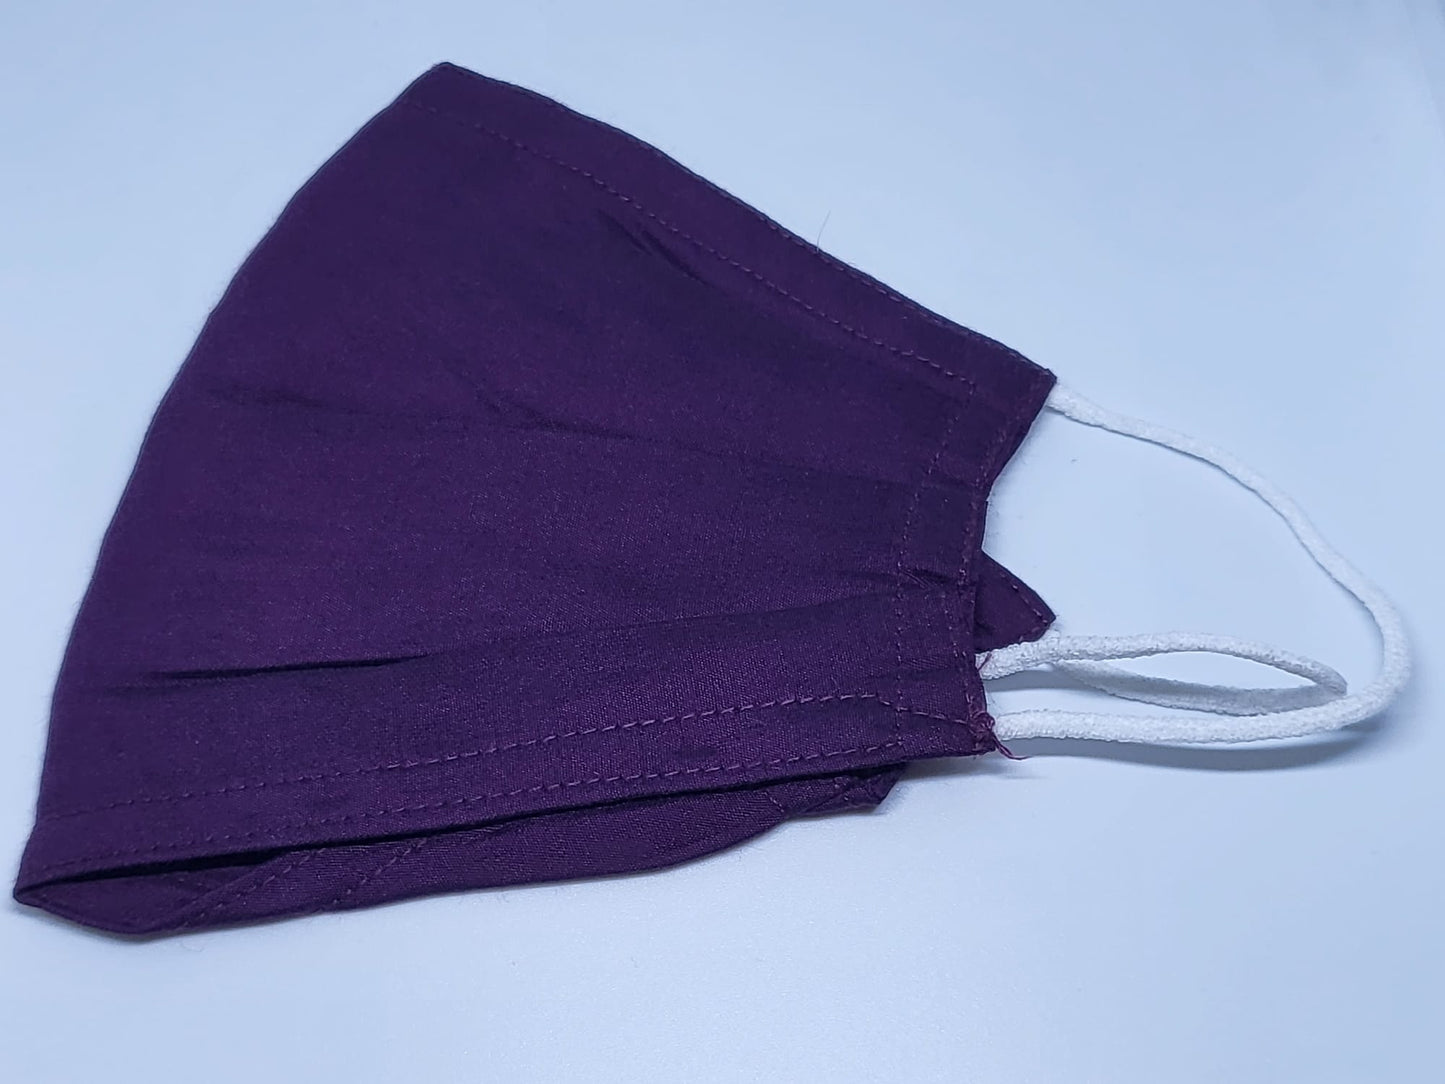 Best quality mask to keep you safe with purple silk suit